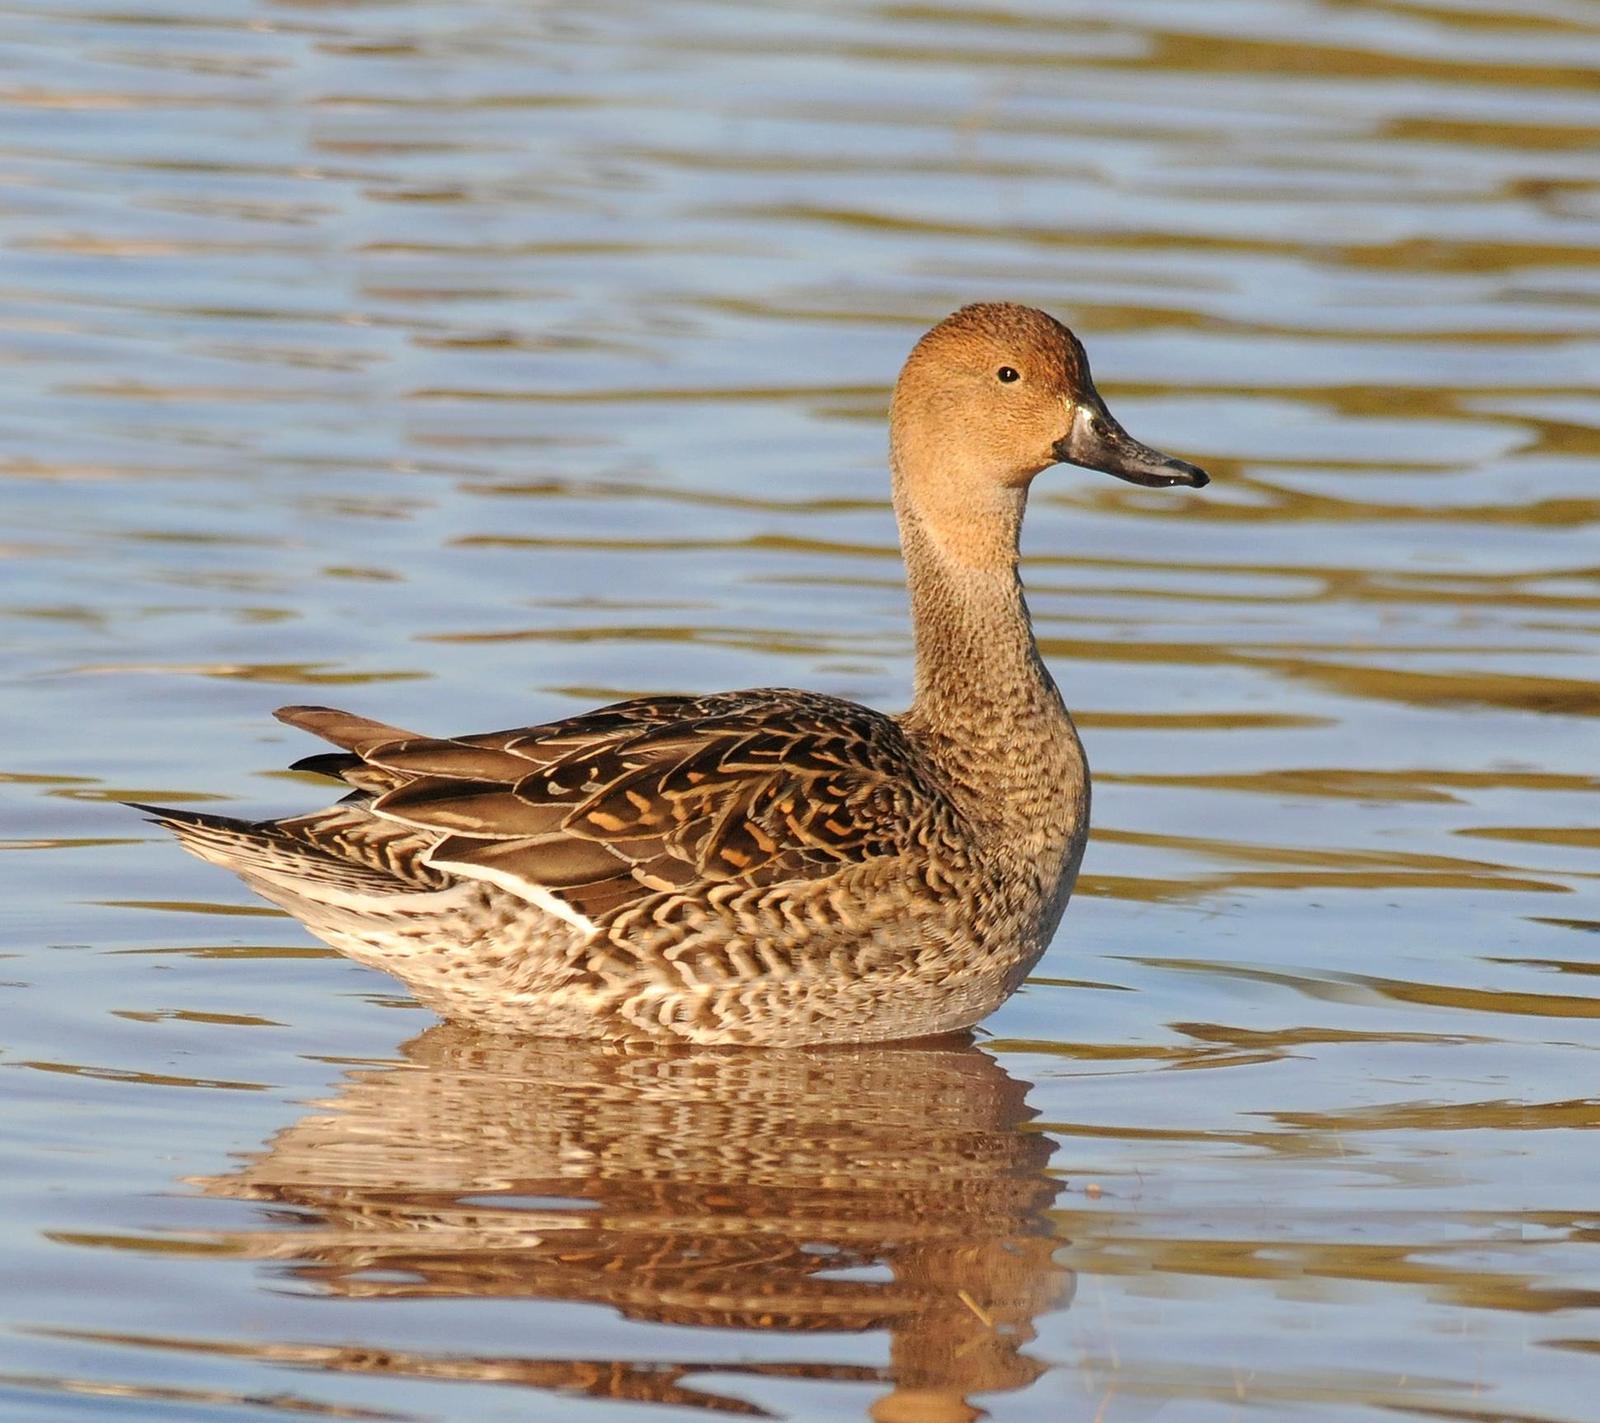 Northern Pintail Photo by Steven Mlodinow